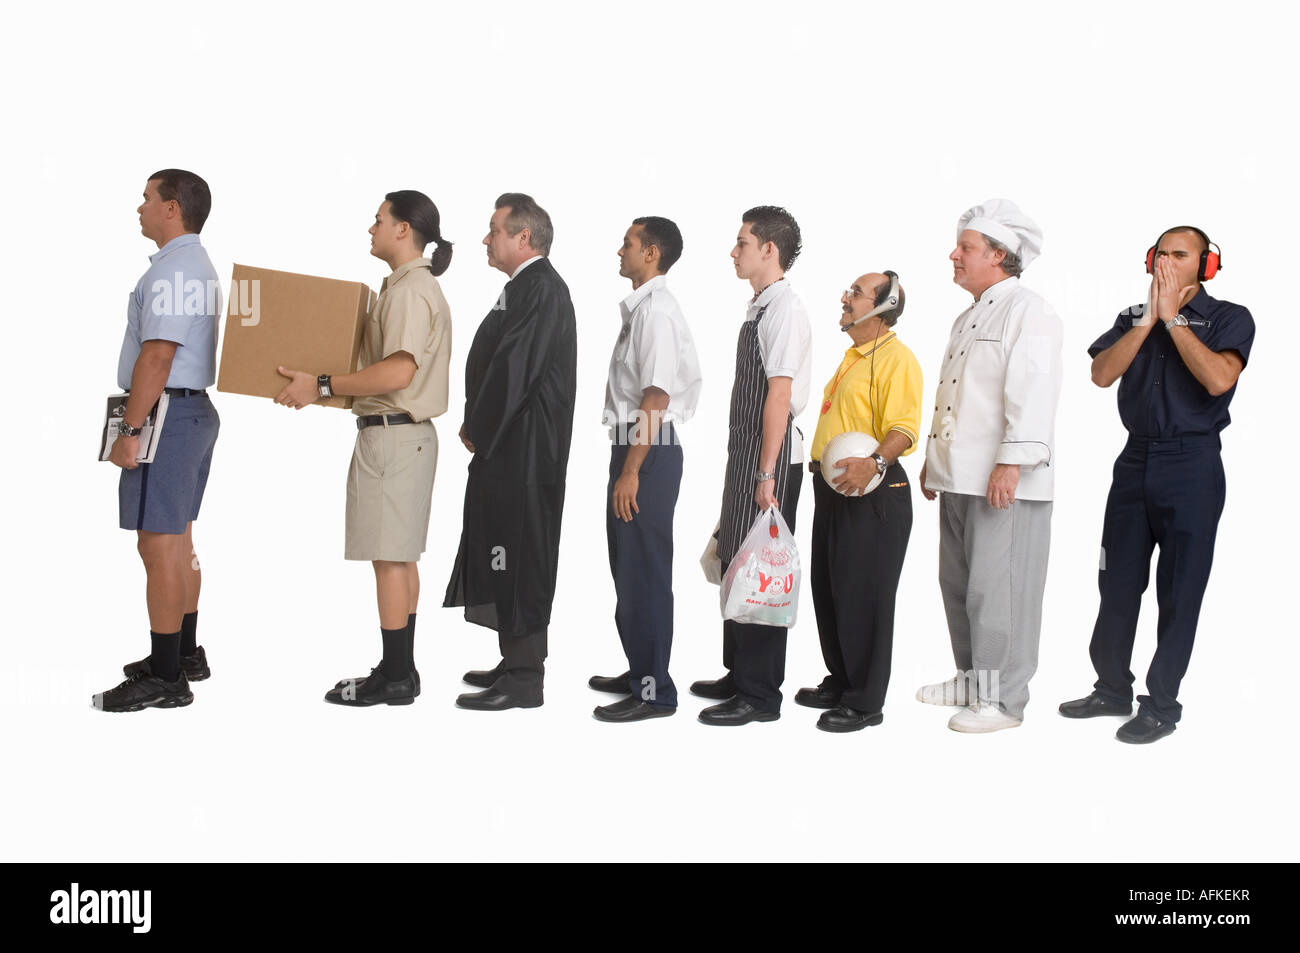 Group of men of different professions standing in line Stock Photo